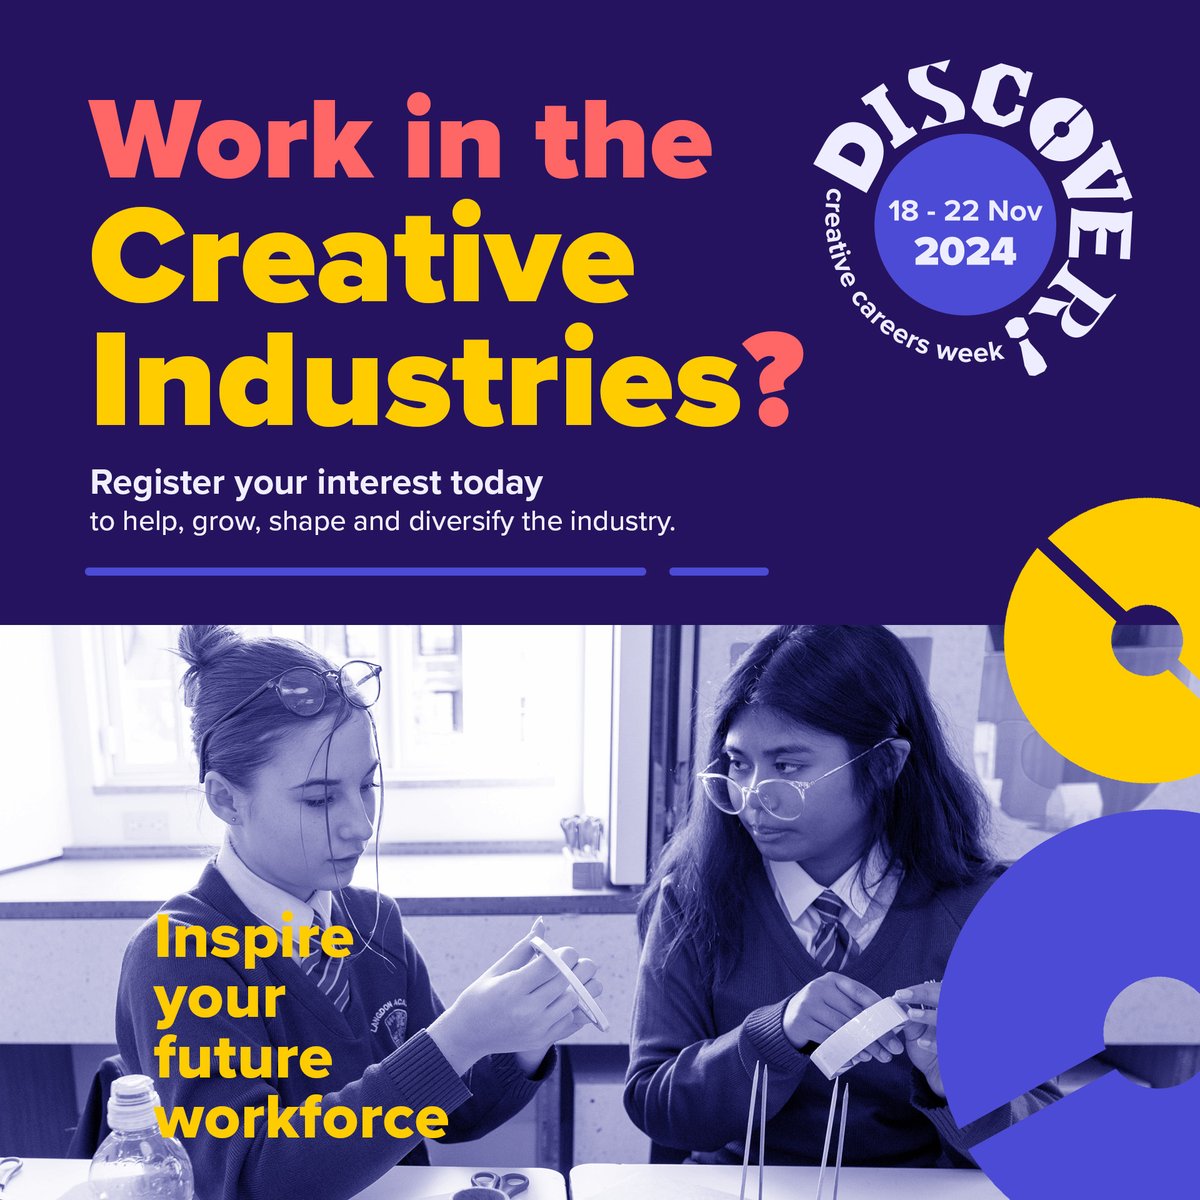 Did you hear that #DiscoverCreativeCareers Week is returning?

If you're an employer in the #CreativeIndustries, get involved with their nationwide and online activity from 18-22 November 2024!

Learn more and register: bit.ly/dcc_2024